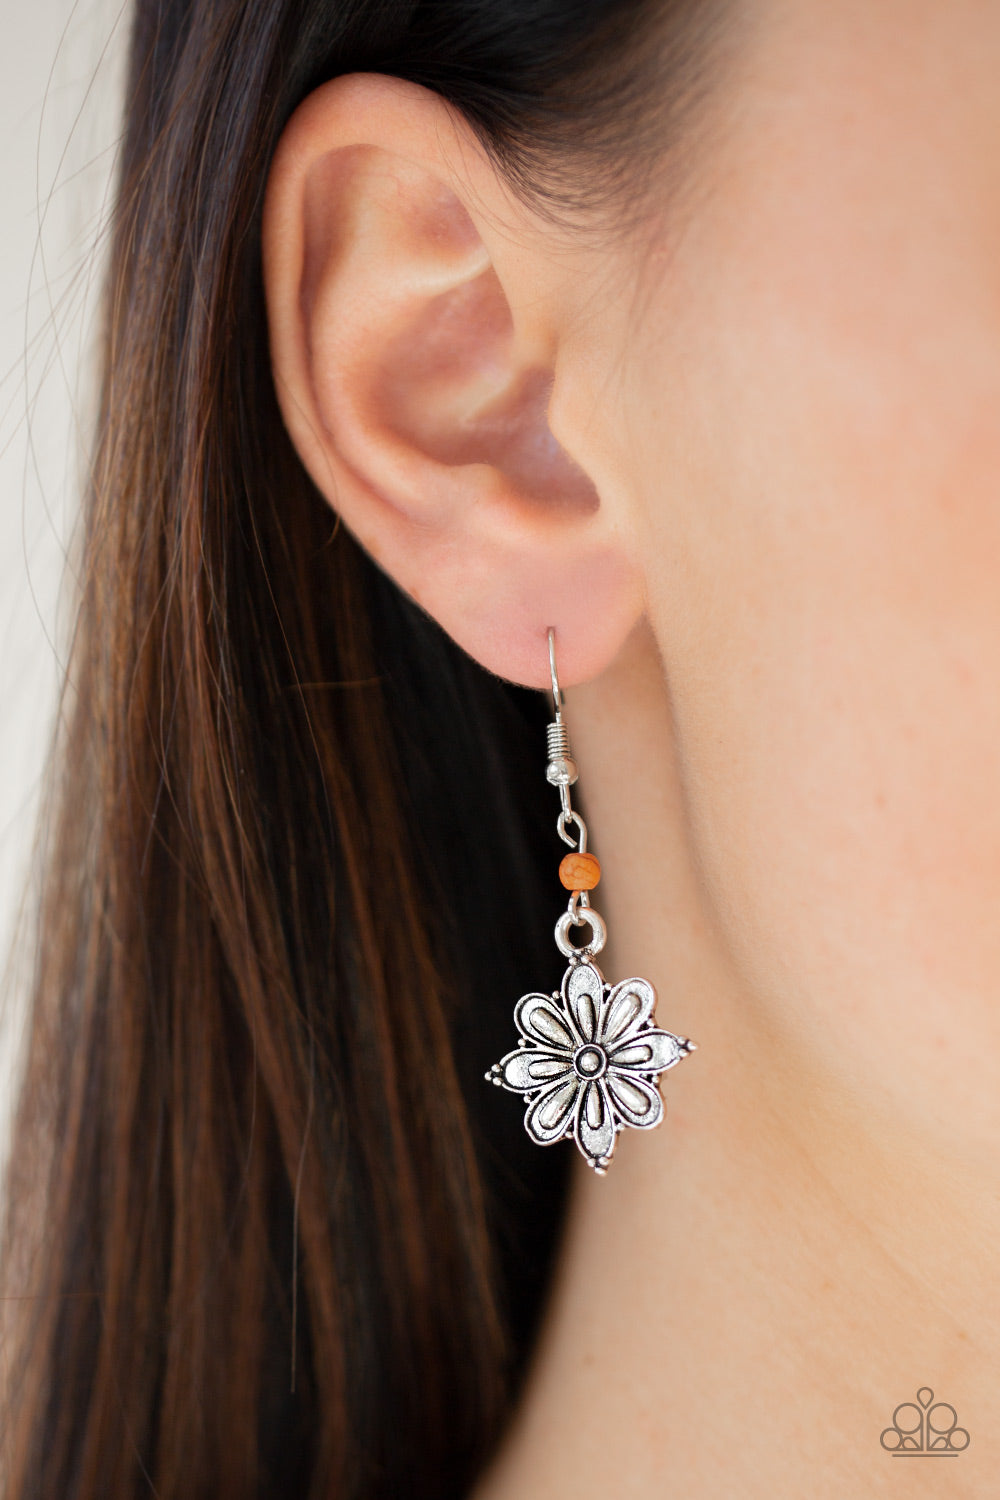 Cactus Blossom - Orange Stone and Silver Flower Earrings - Paparazzi Accessories - All That Sparkles Xoxo 